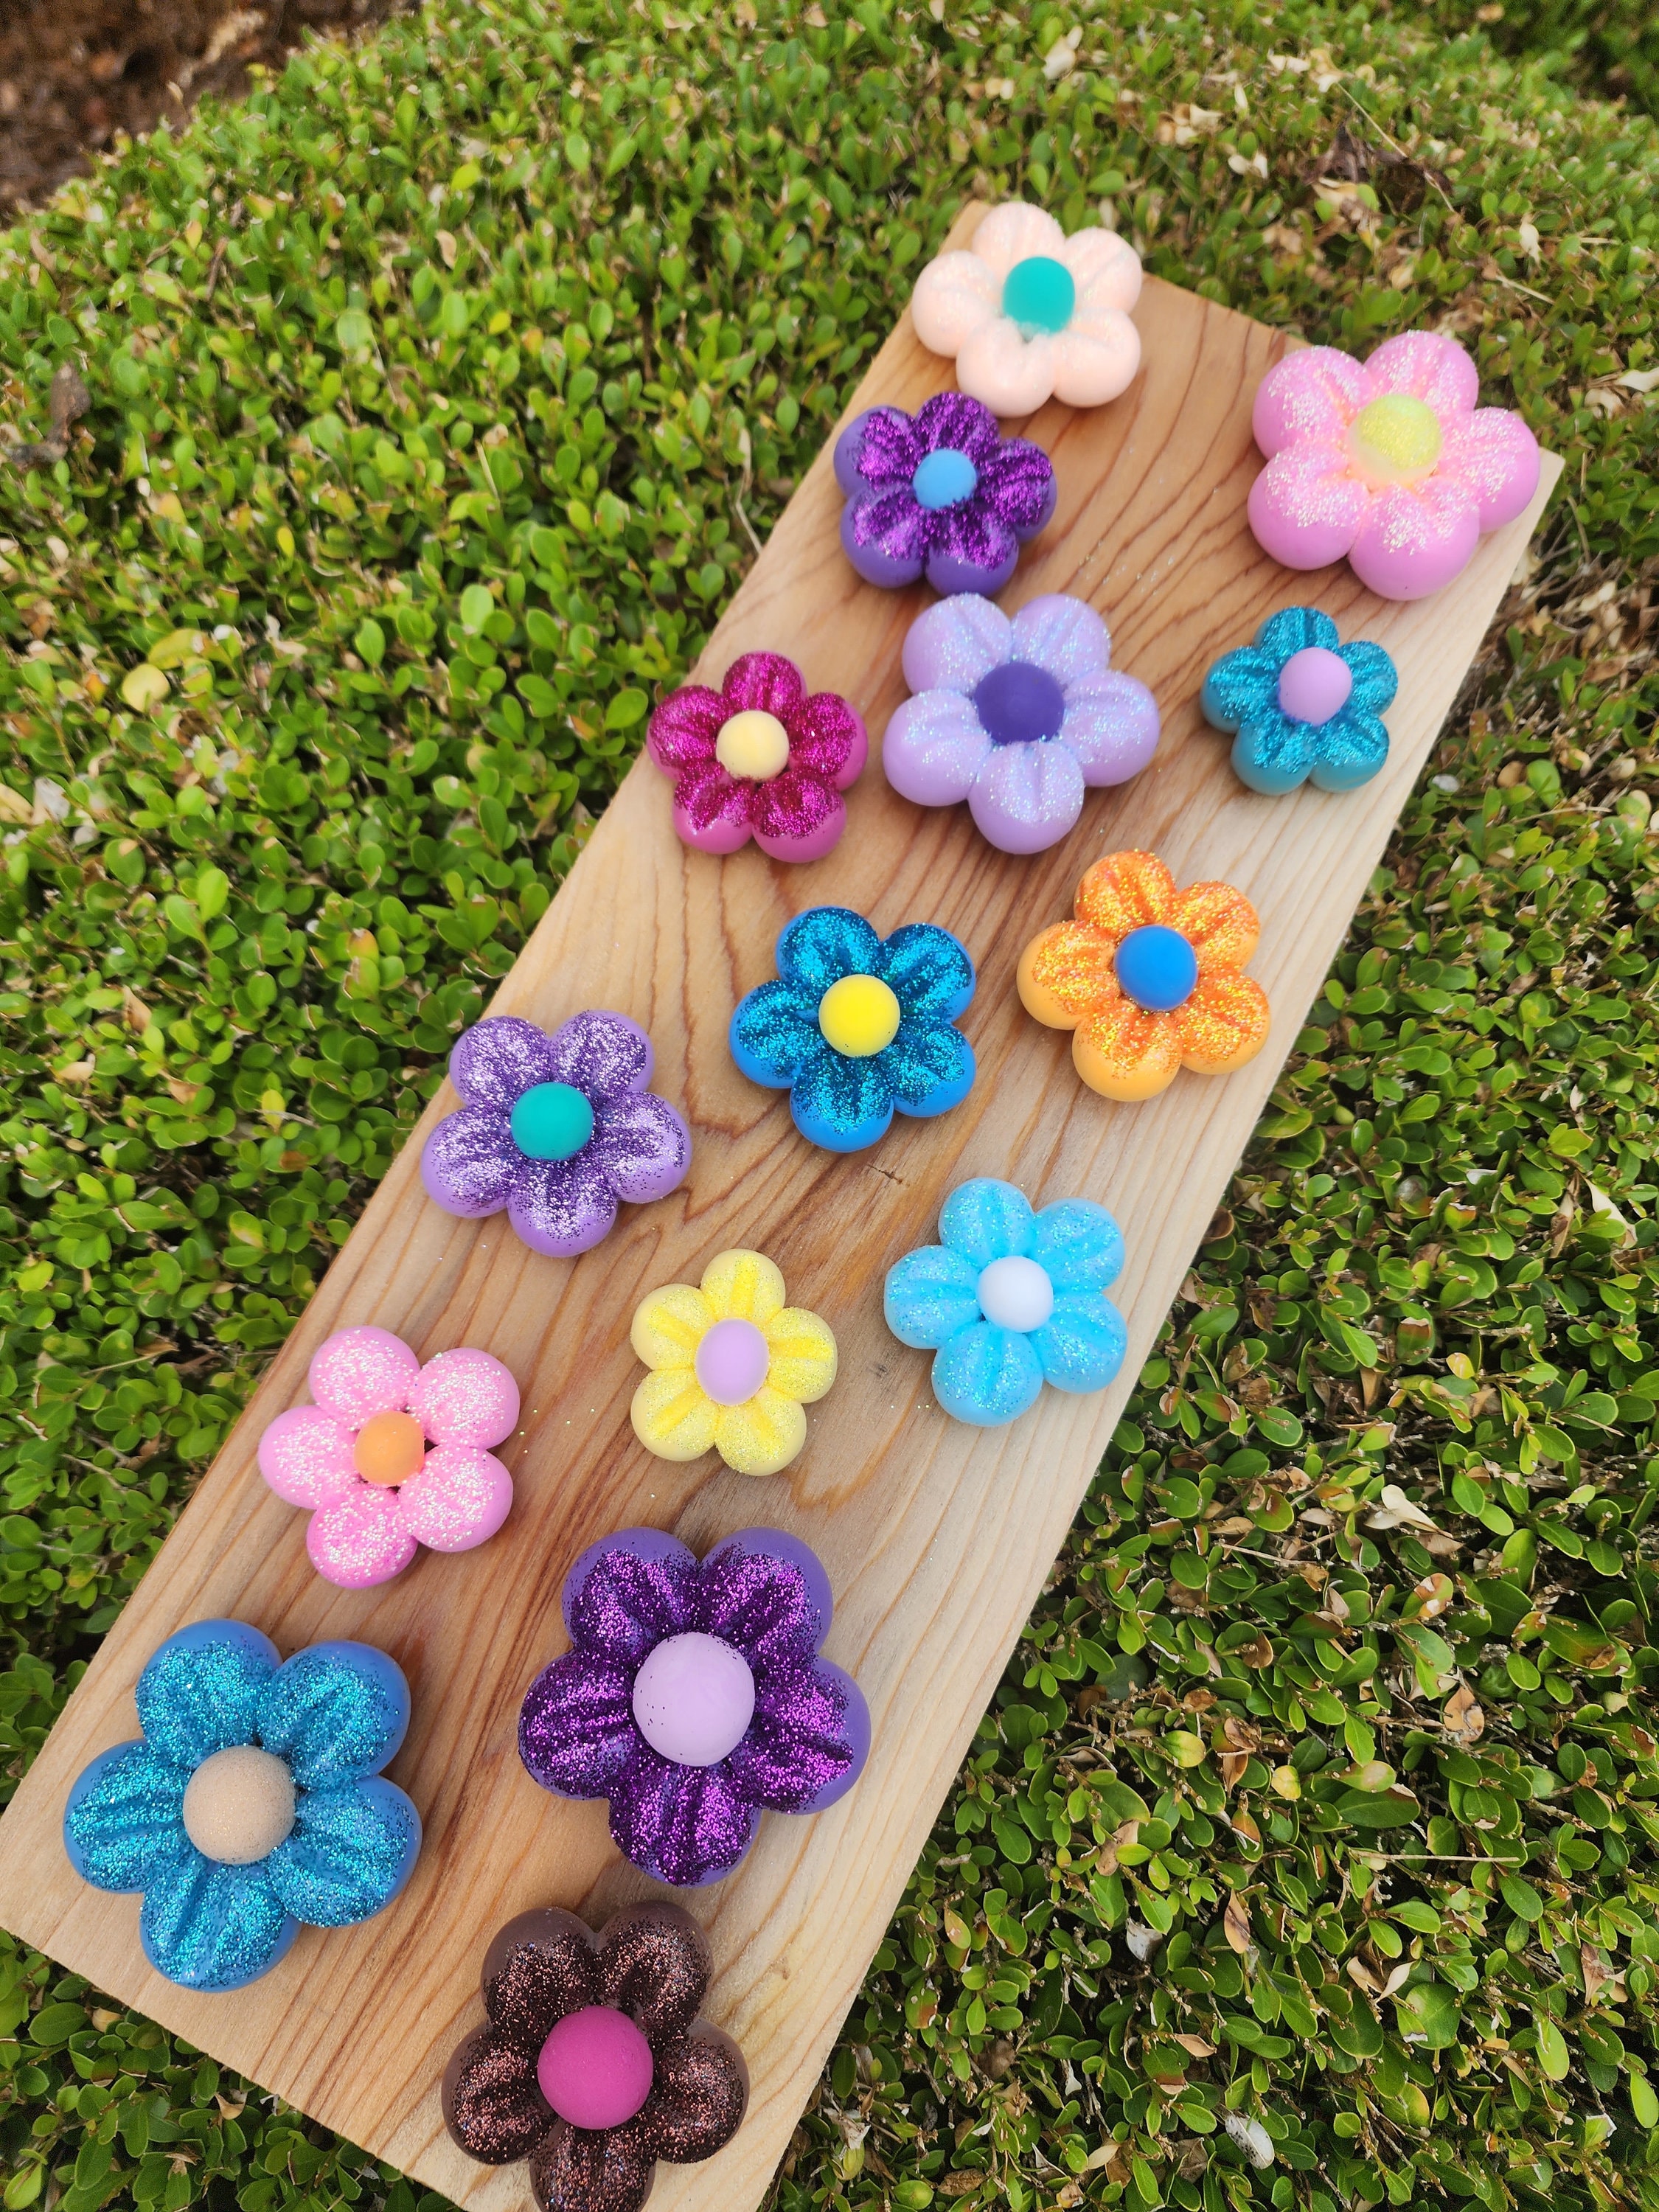 Let's make clay flowers